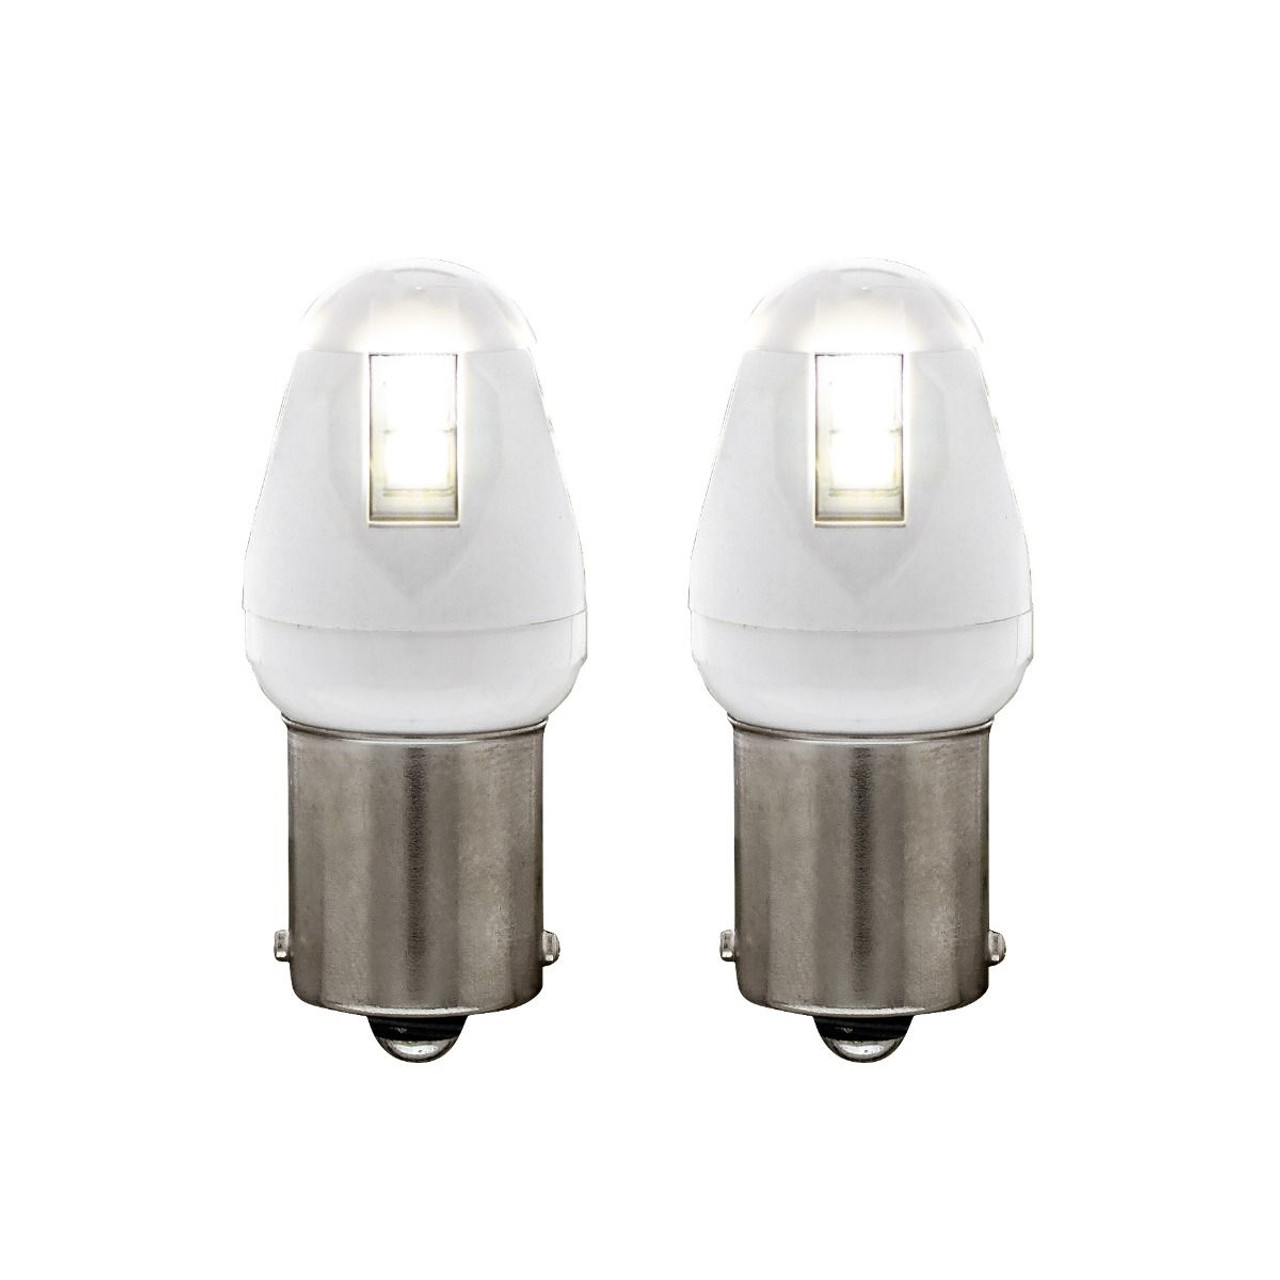 United Pacific  High Power 8 LED 1156 Bulb - White